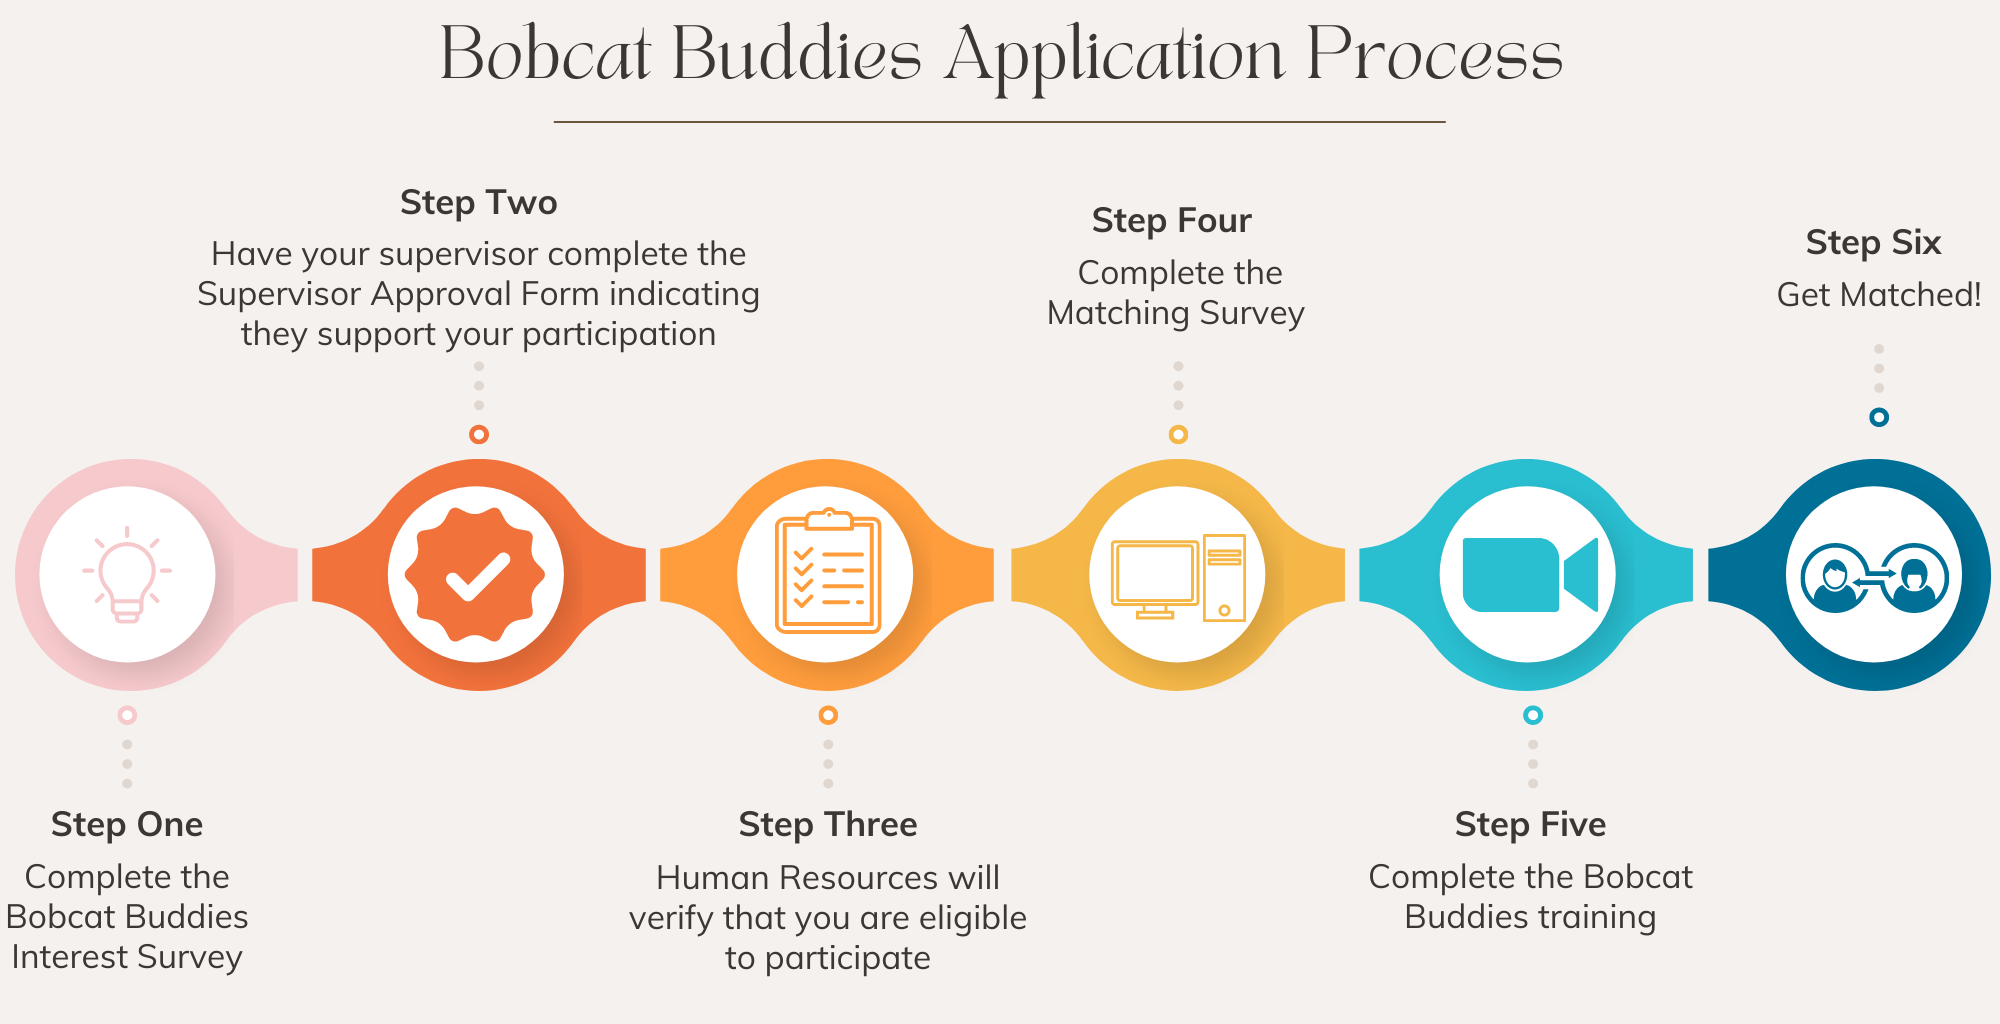 Bobcat Buddies Application Process, Complete the Bobcat Buddies Interest Survey, Human Resources will verify that you are eligible to participate, Your supervisor will complete the Supervisor Approval Form indicating they support your participation, Complete the Matching Survey and online training course in SF Learning, Attend a live Zoom session, Get Matched